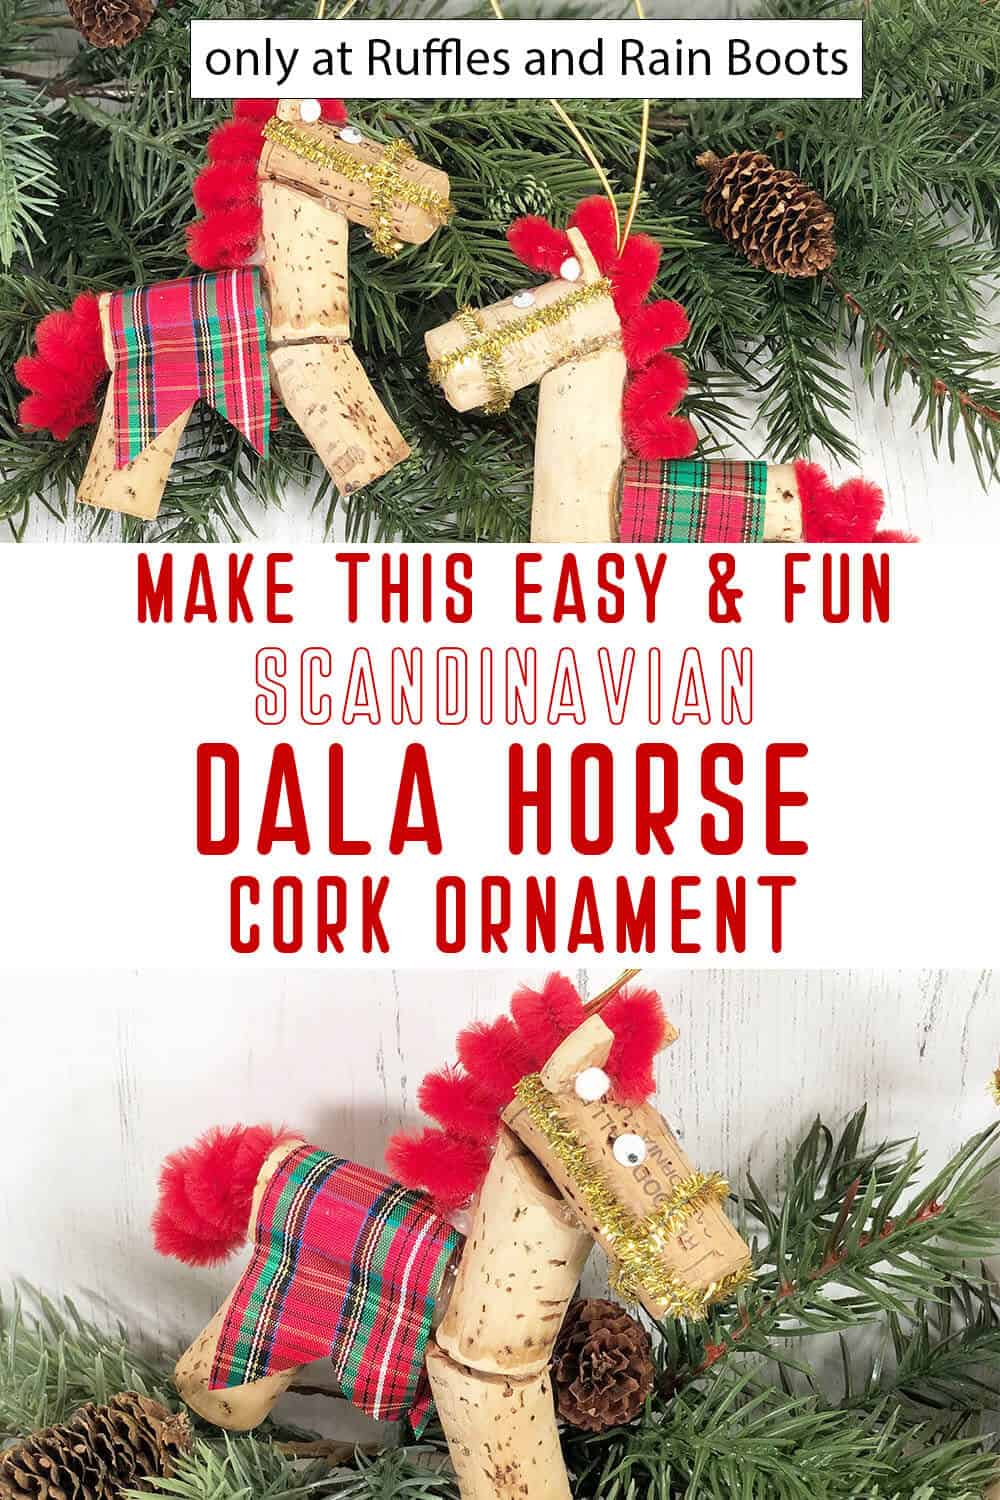 DIY scandinavian horse ornament with text which reads make this easy & fun scandinavian dala hors cork ornament